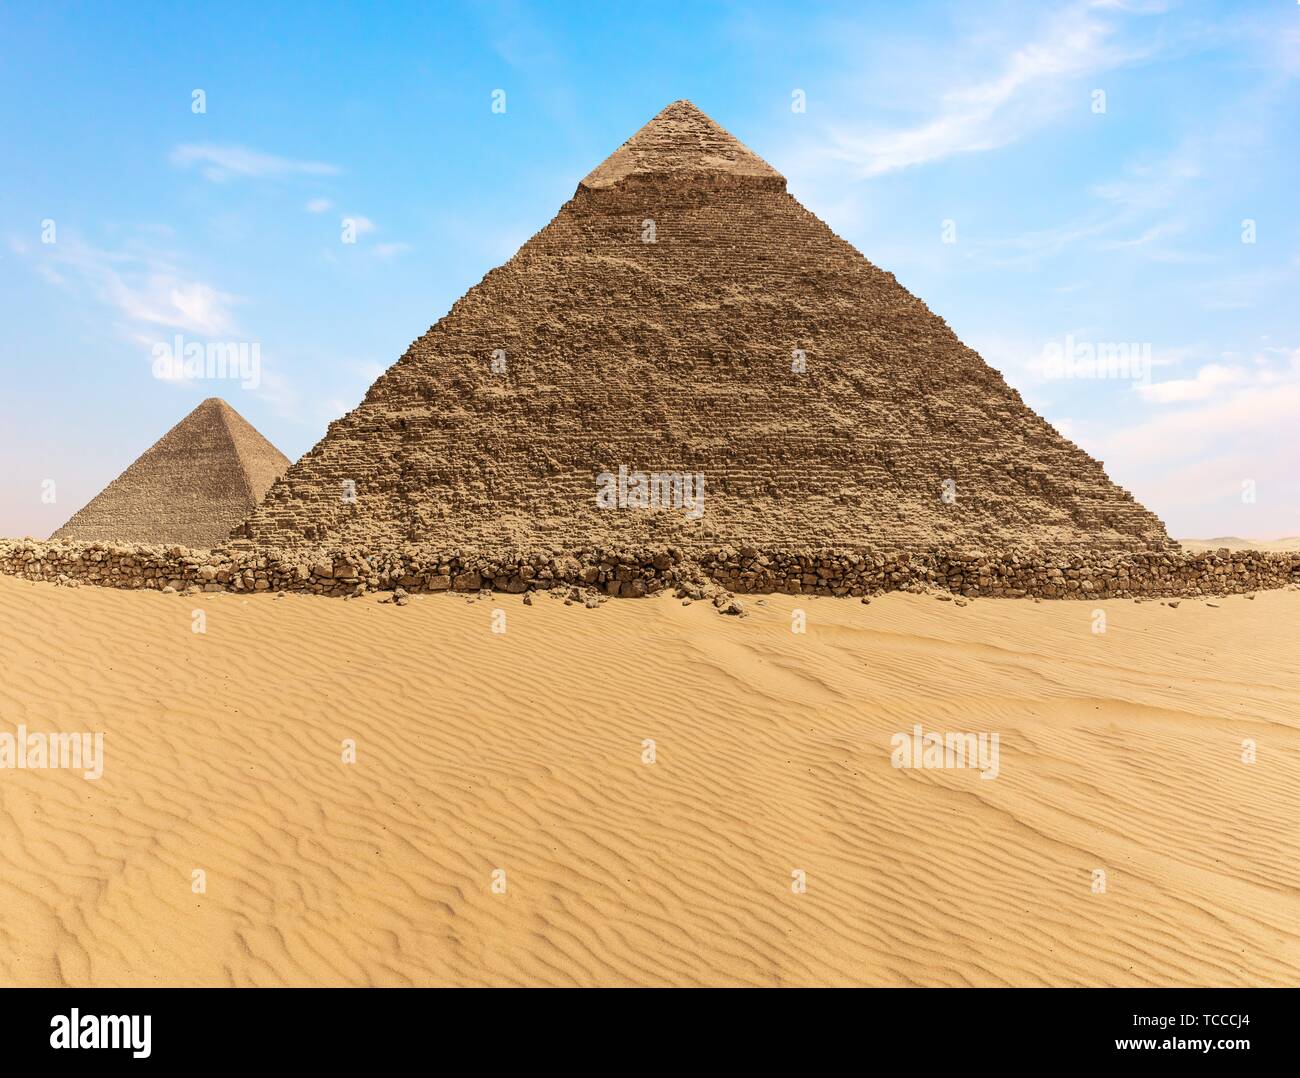 The Pyramid of Khafre and the Pyramid of Cheops, Giza, Egypt. Stock Photo